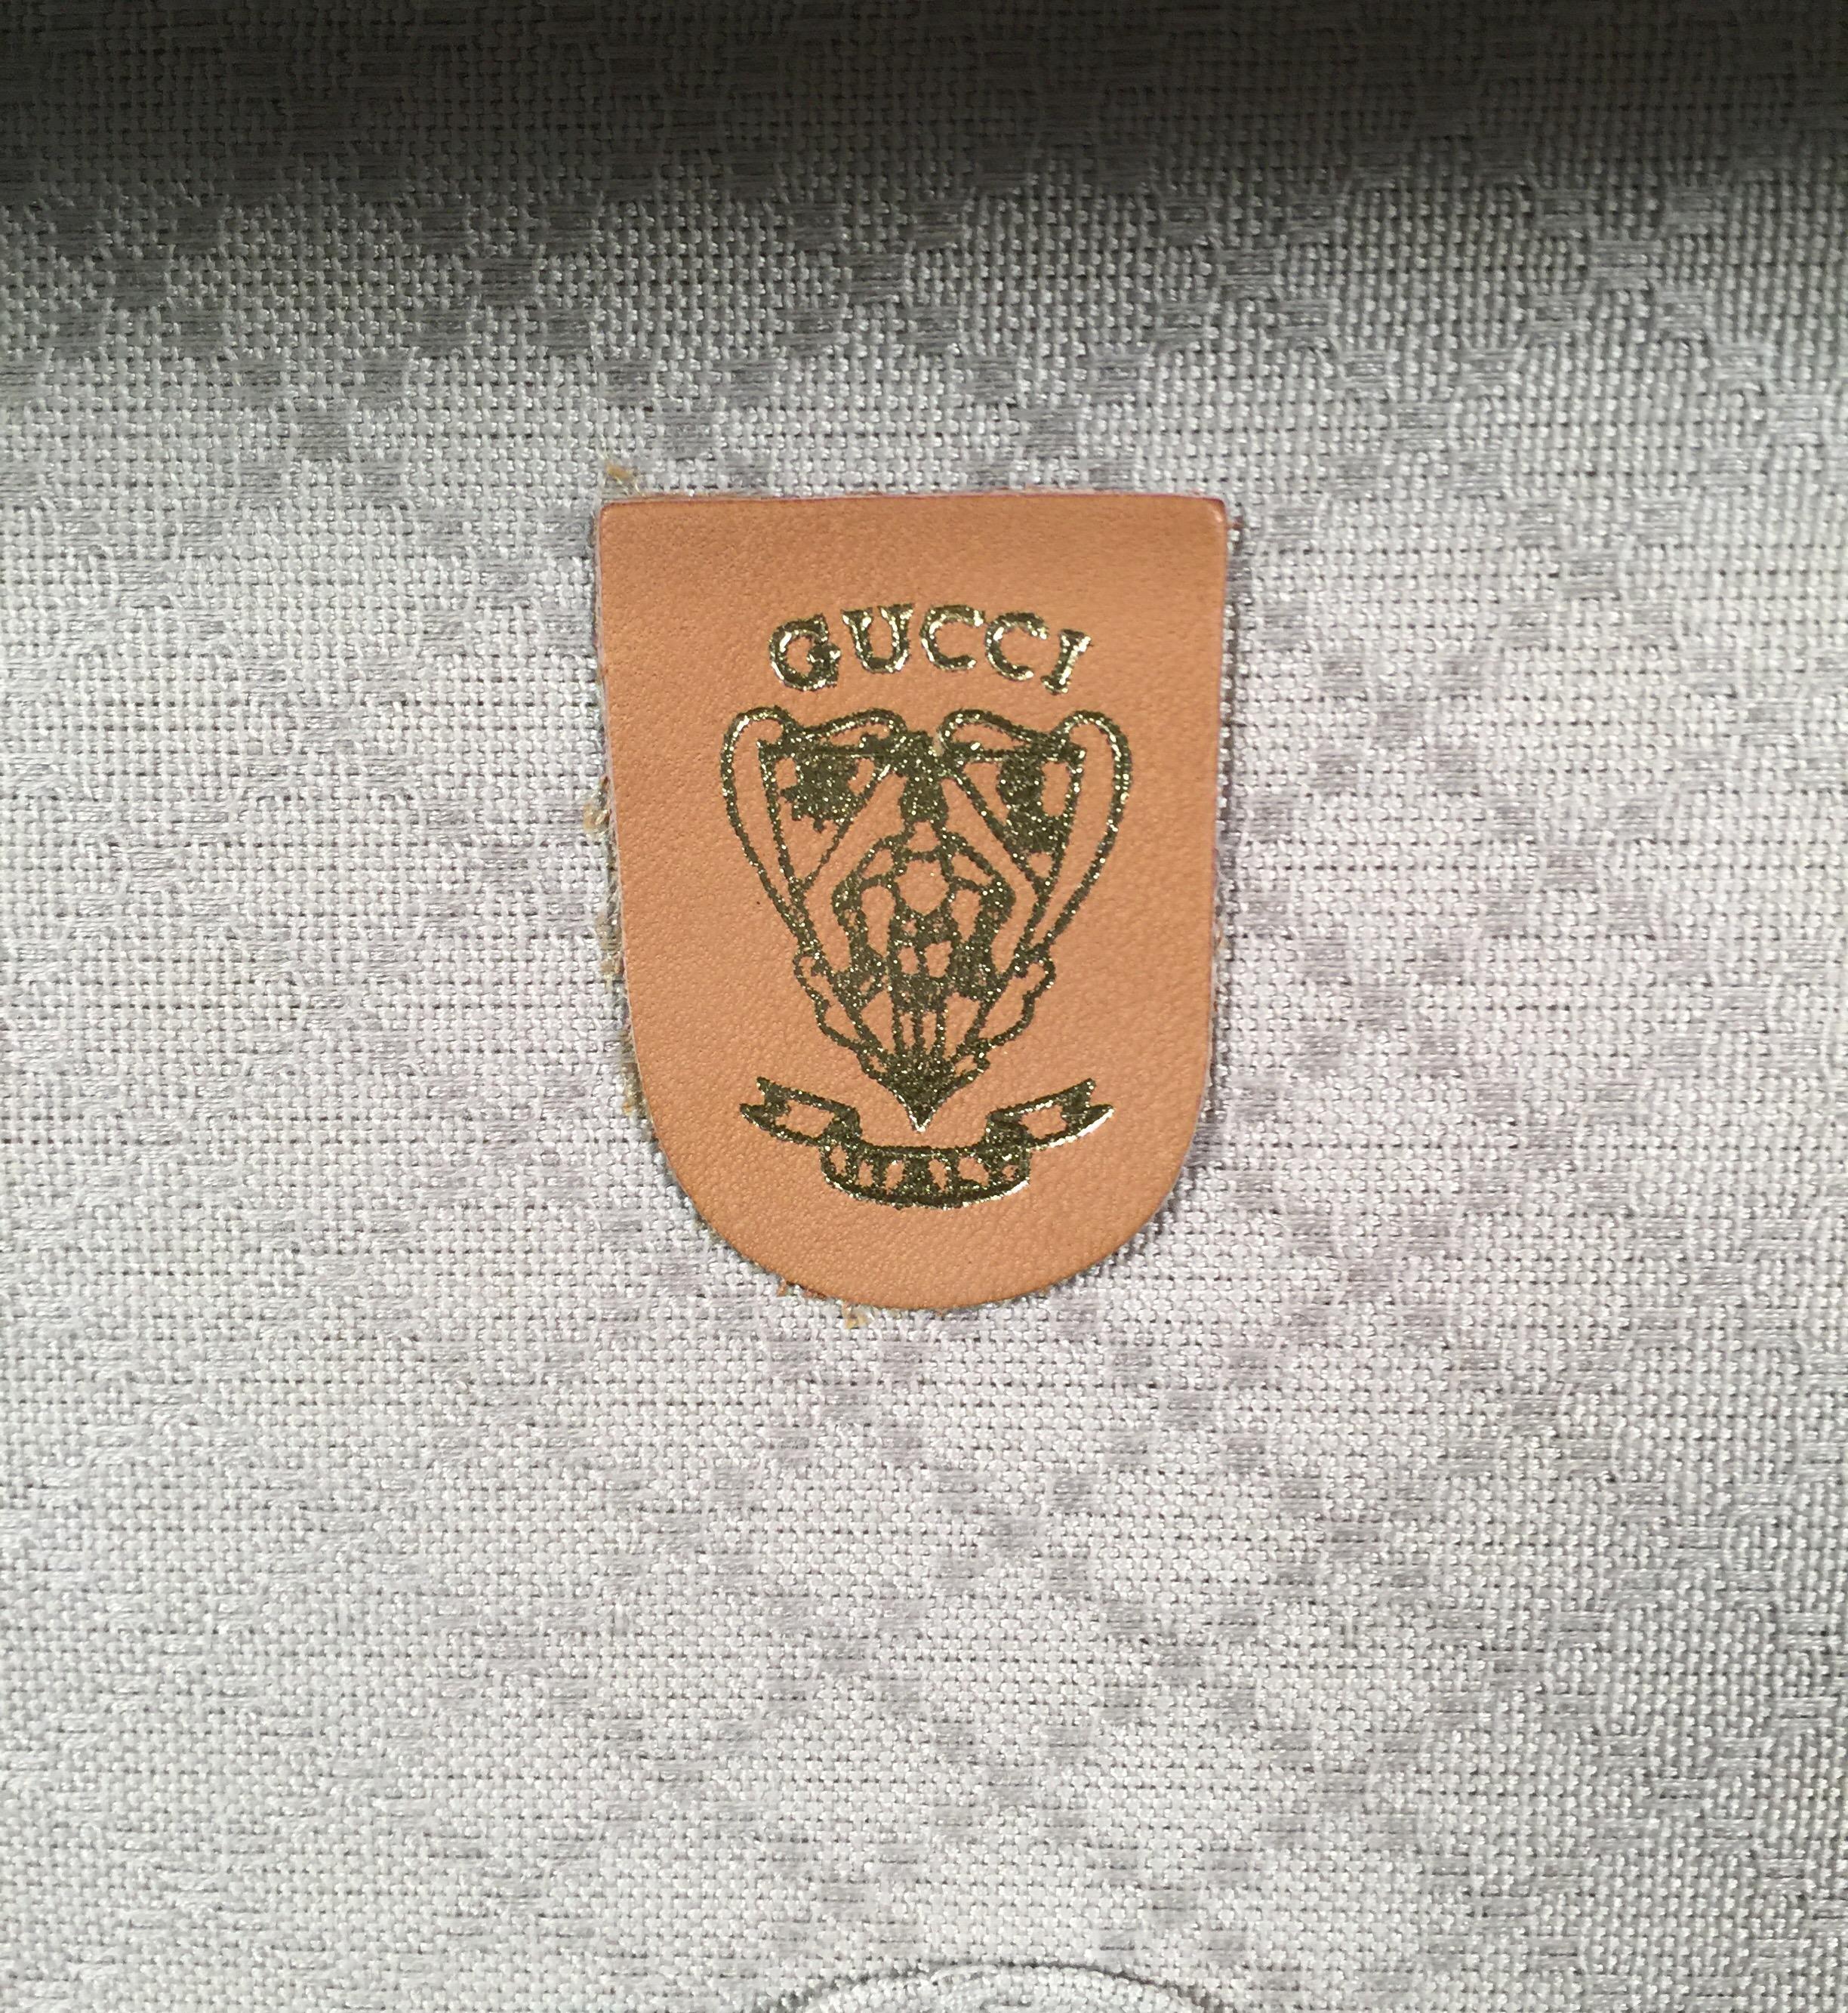 1970s Original Gucci Logo Hard Sided Suitcase or Travel Trunk, Unused Condition 1